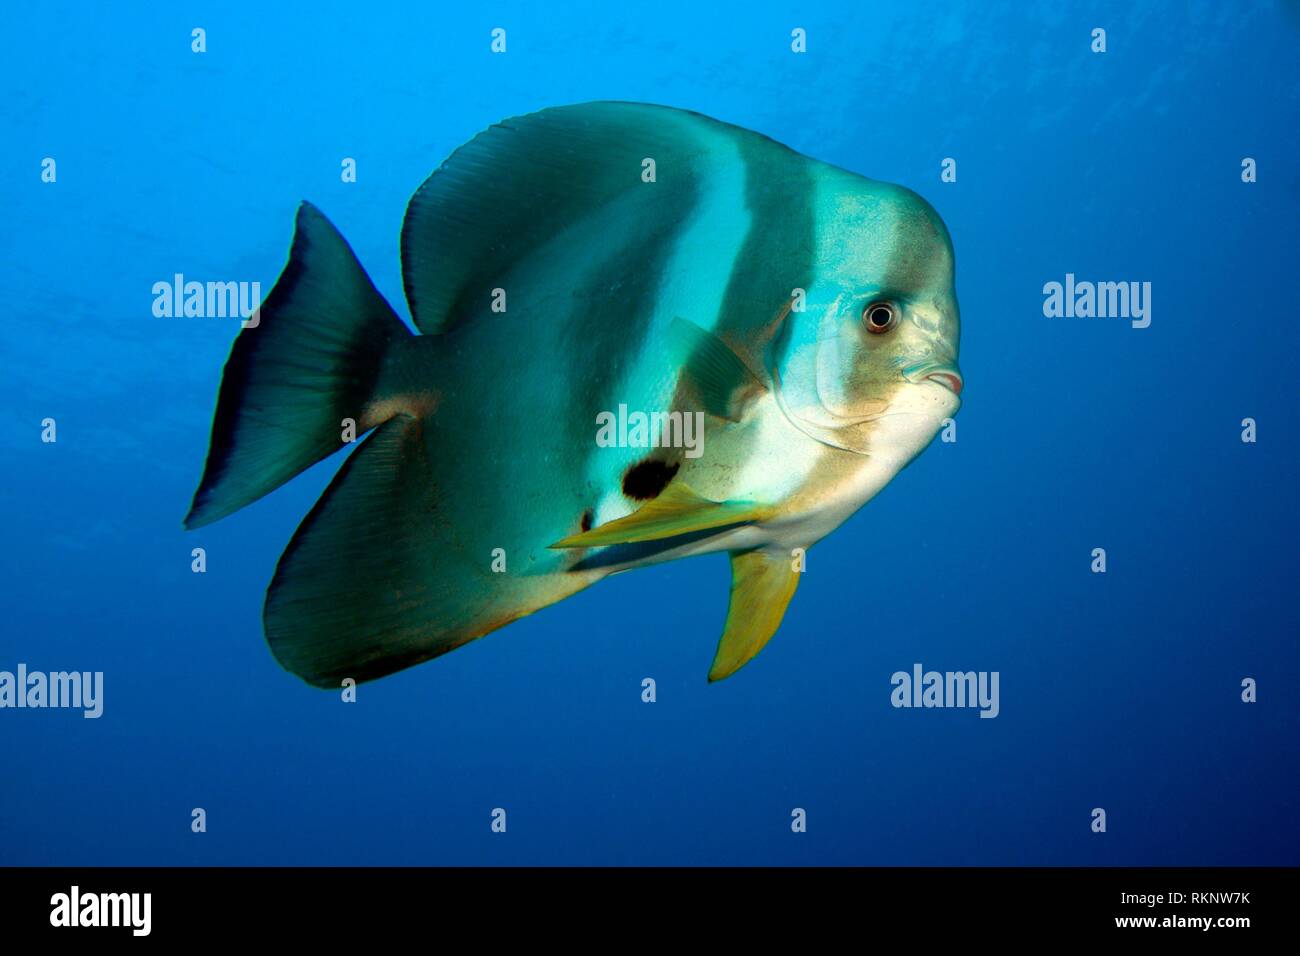 Tall-fin batfish ((Platax teira) swimming in the blue, Indian Ocean, Maledives, South Asia. Stock Photo